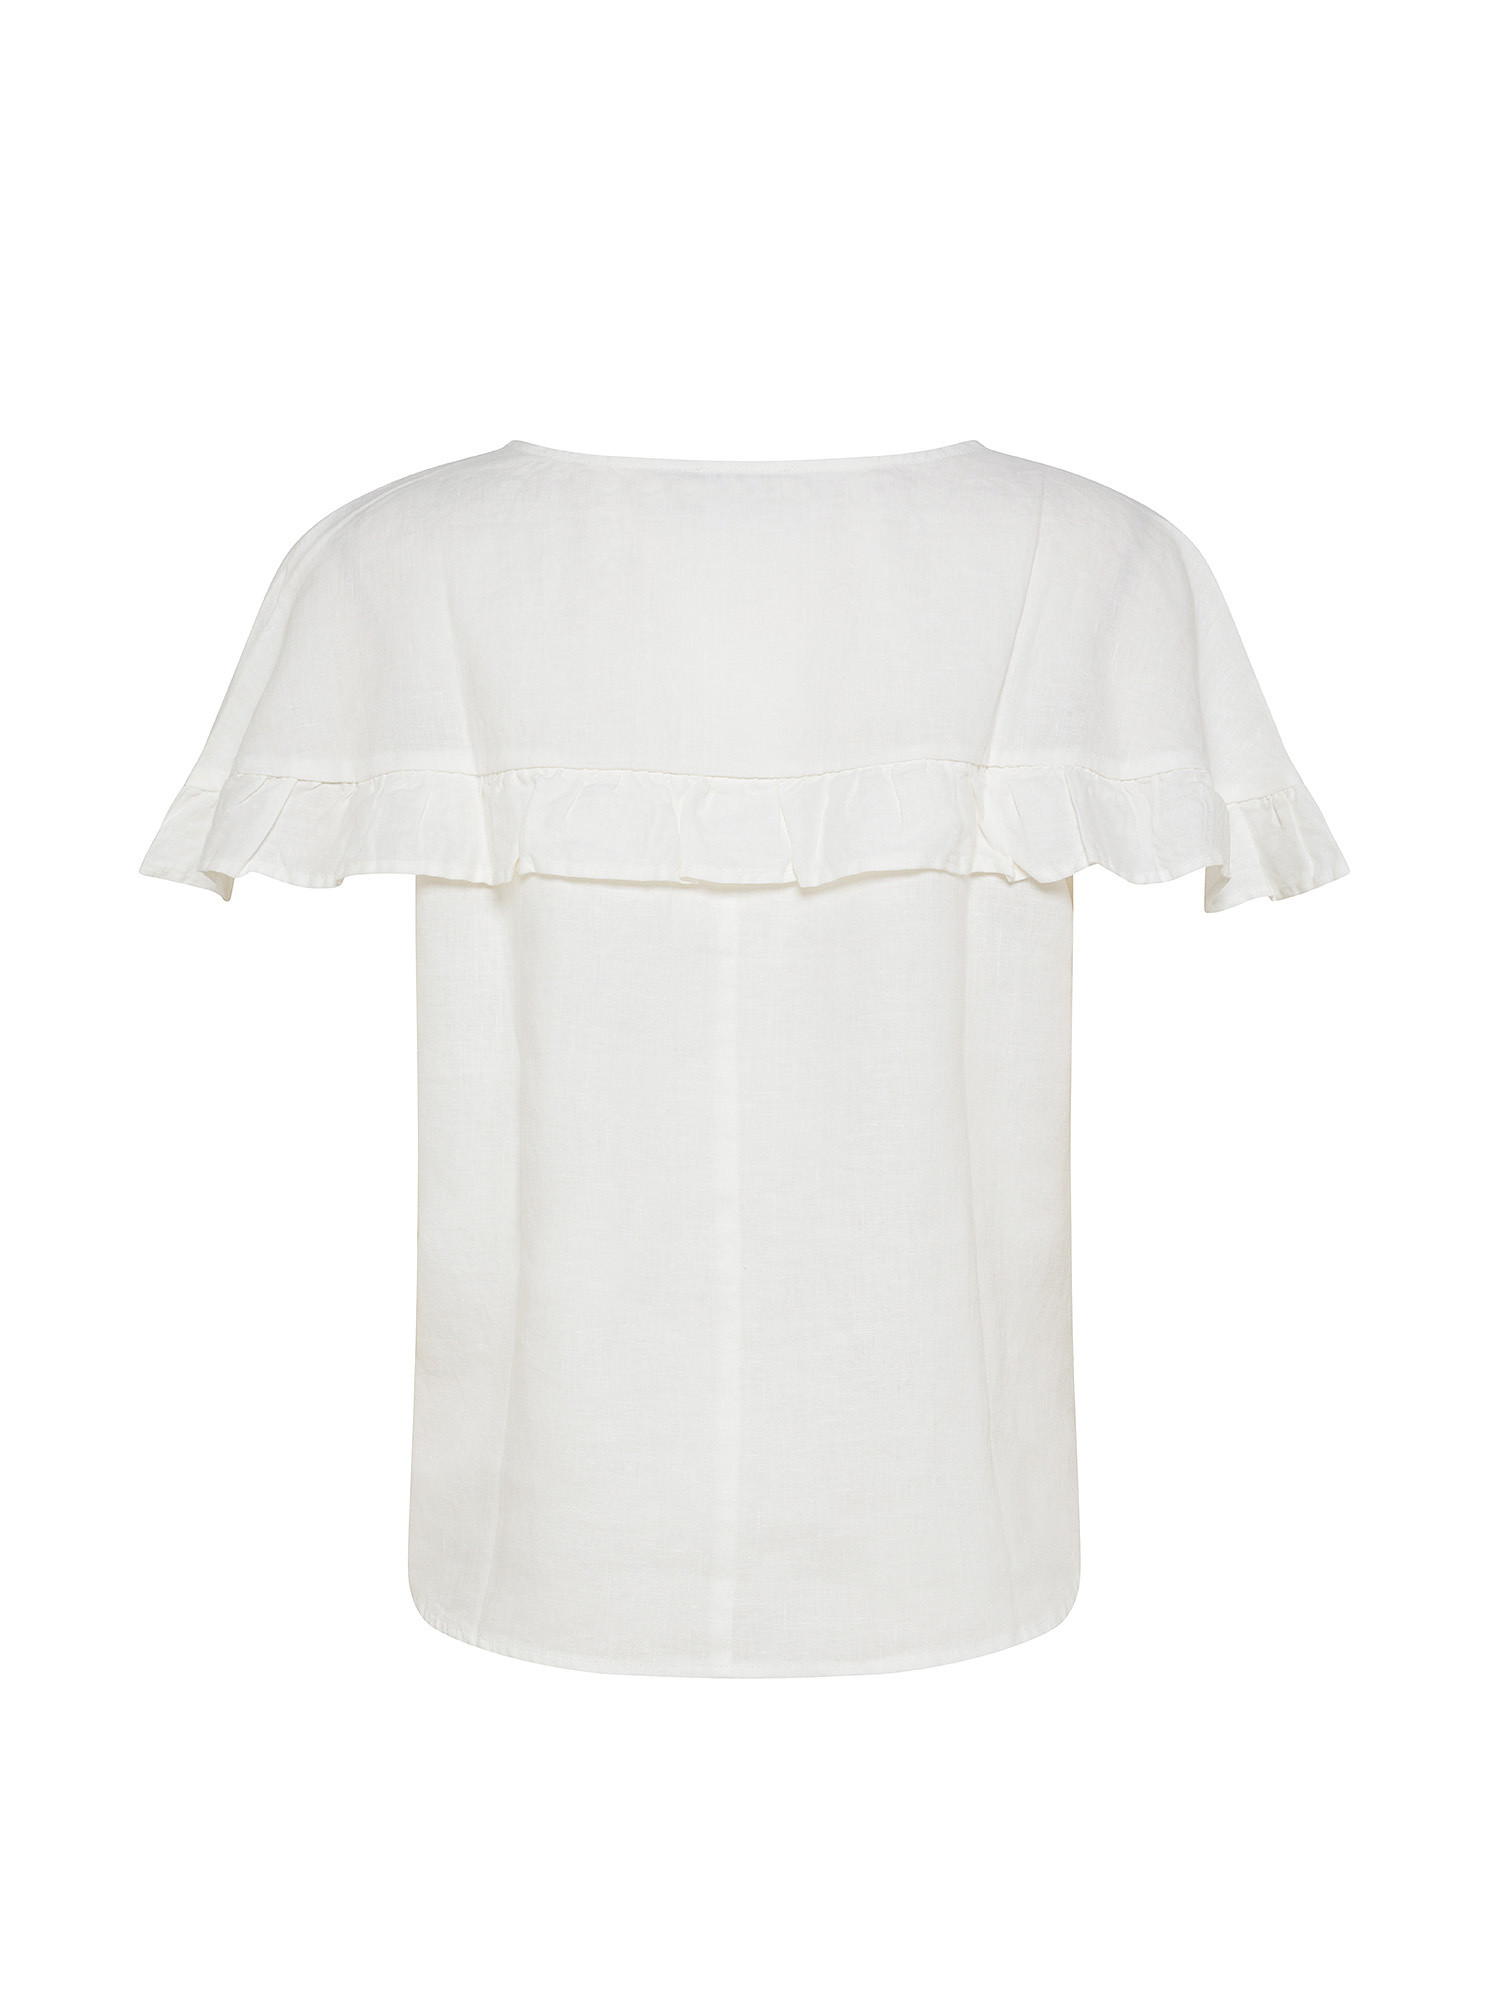 Koan - Linen blouse with ruffles, White, large image number 1